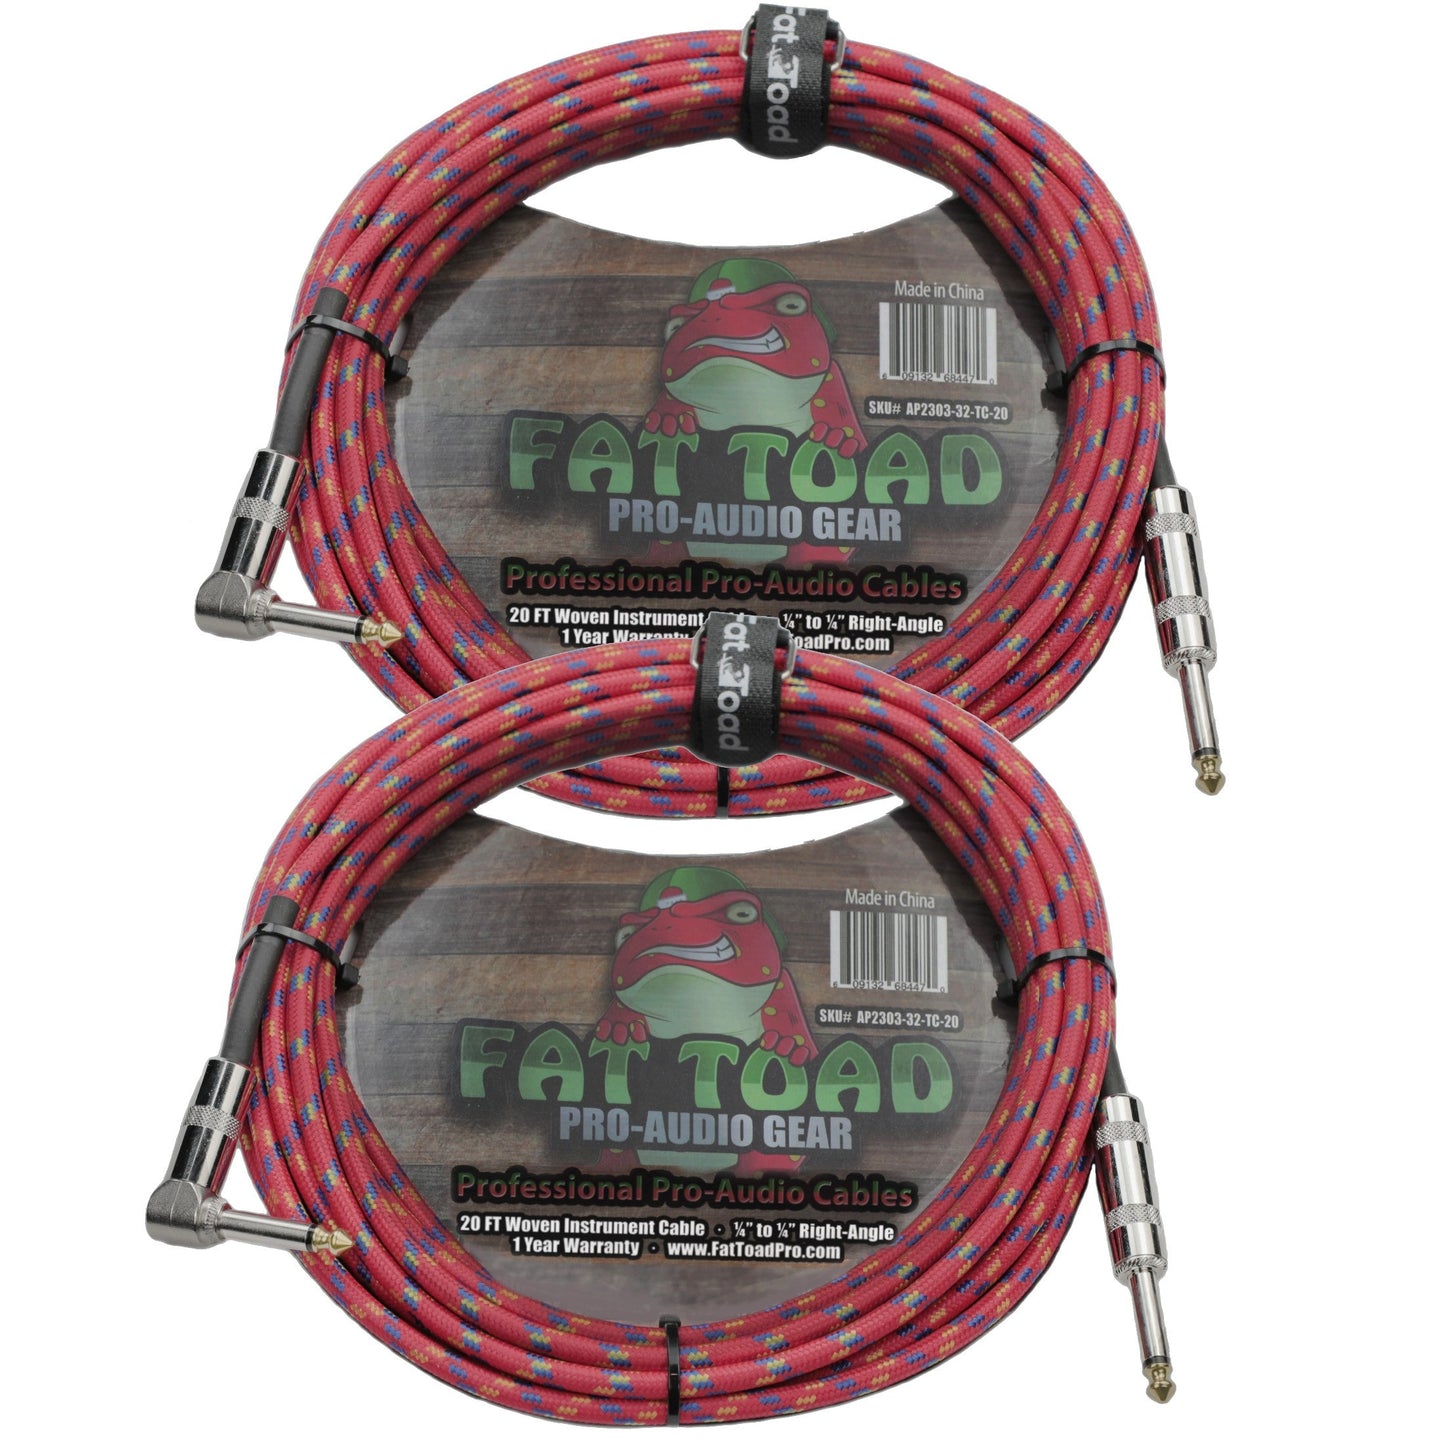 Guitar Cables (2 Pack) Right Angle to Straight-End Instrument Cord Tweed Cloth Jacket by FAT TOAD - Braided Woven 20 FT 1/4 Inch Gold Jack TS